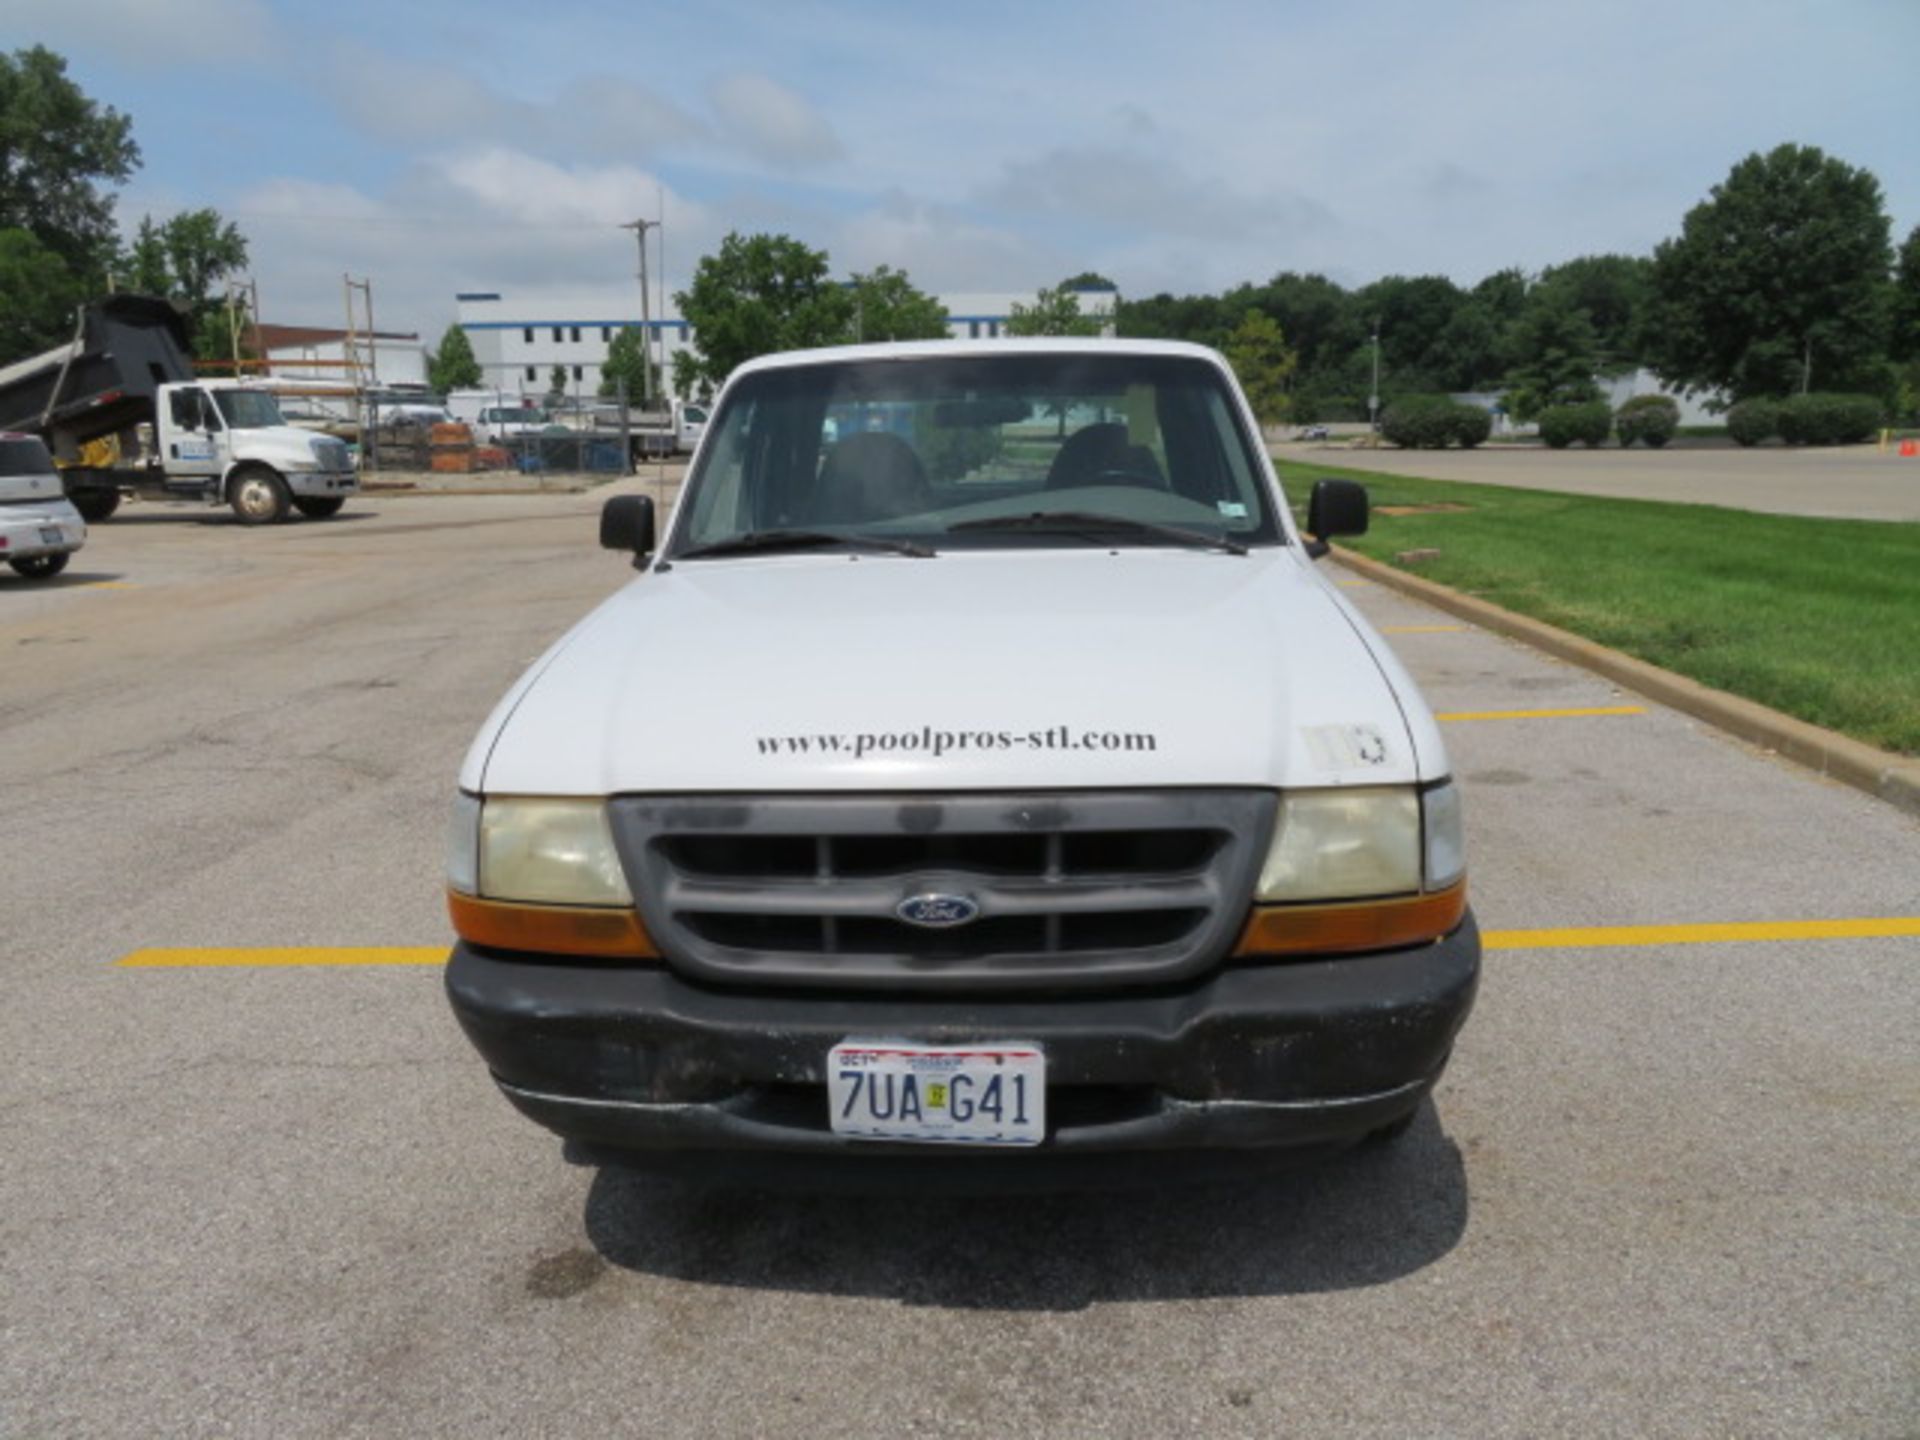 PICKUP TRUCK, 1998 FORD RANGER, gas engine, 60/40 front bench seat, Odo: 236,537 miles, 6' bed w/ - Image 2 of 9